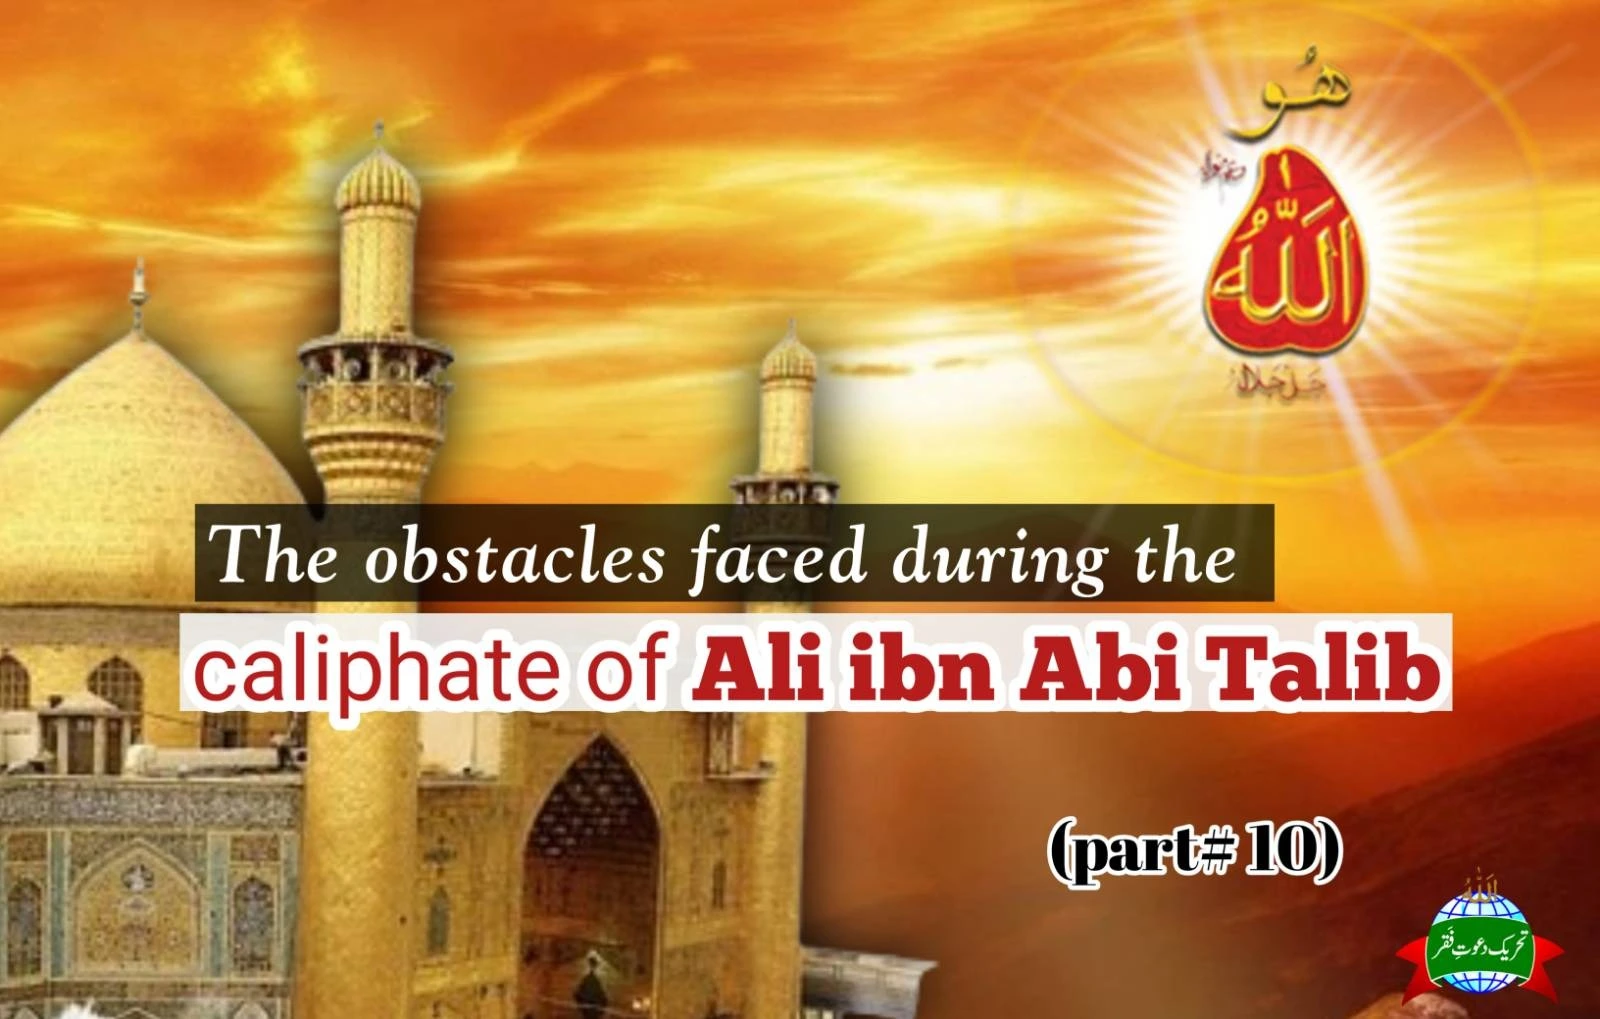 THE OBSTACLES FACED DURING THE CALIPHATE OF ALI IBN ABI TALIB  Part 10